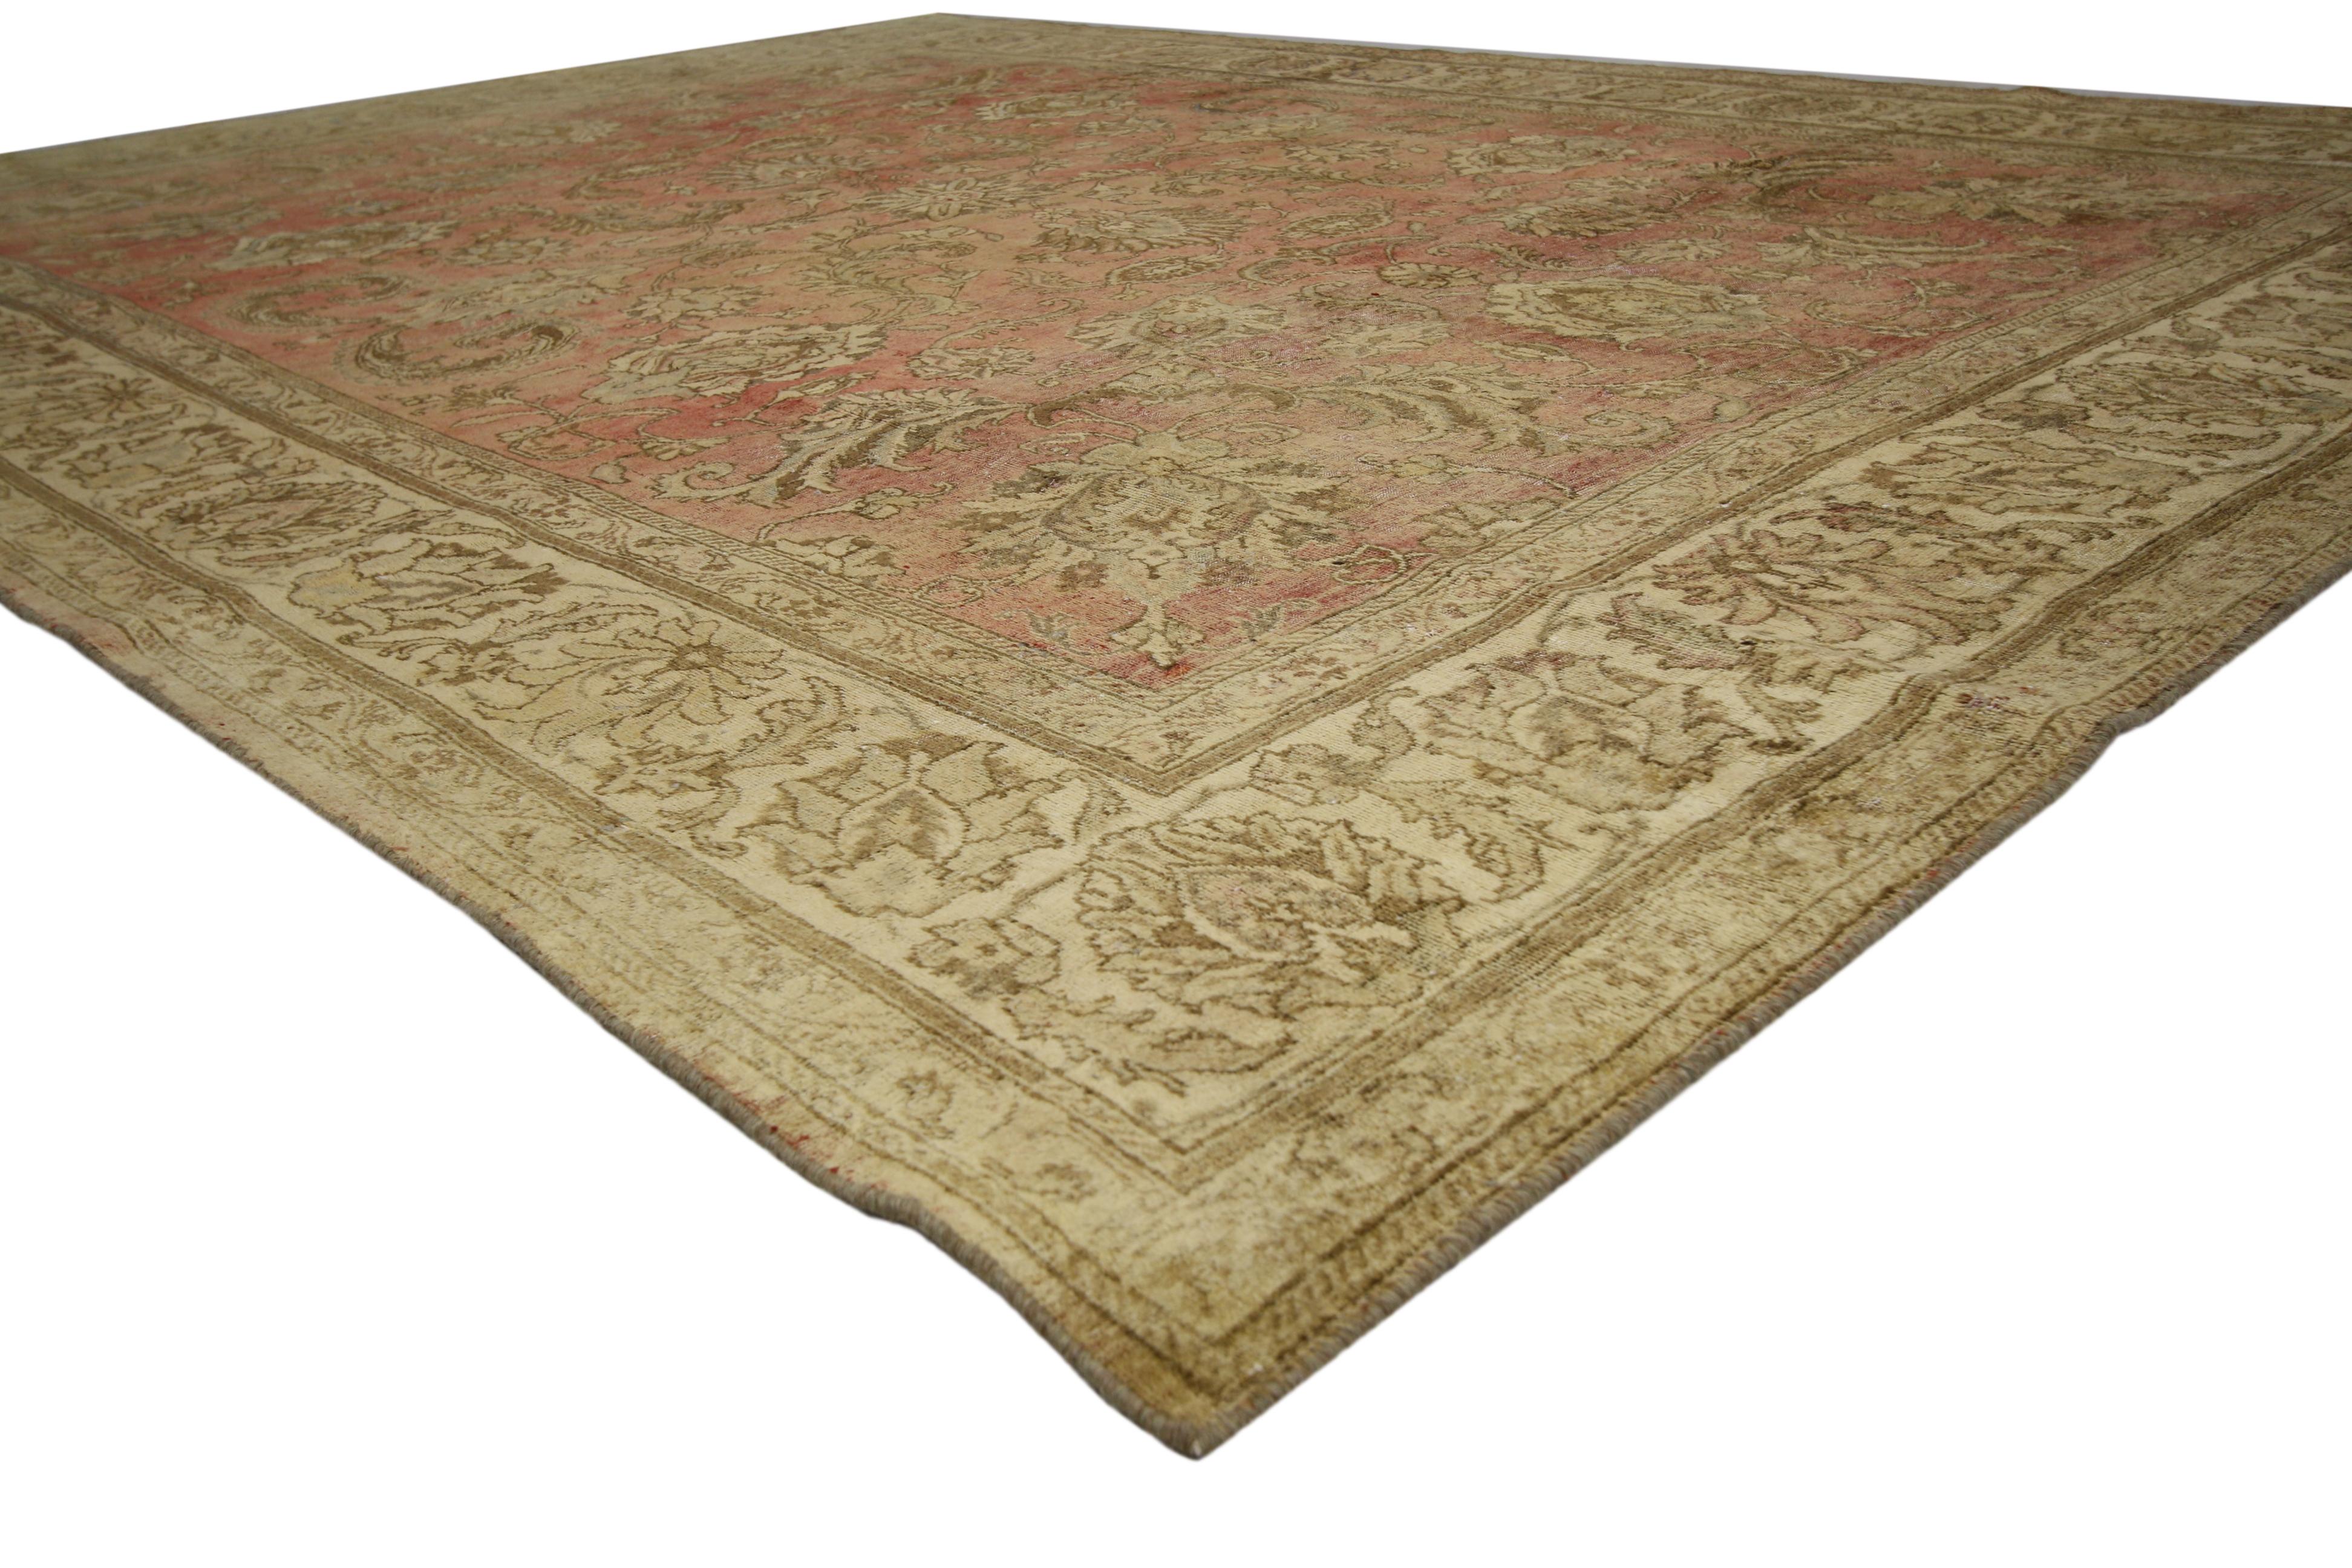 60734, distressed vintage Tabriz Persian rug with rustic style. Elegance and charm collide in this stunning Persian carpet. Rendered against an abrashed brick red and rust colored backdrop, a delicate floral pattern composed of blooming palmettes,